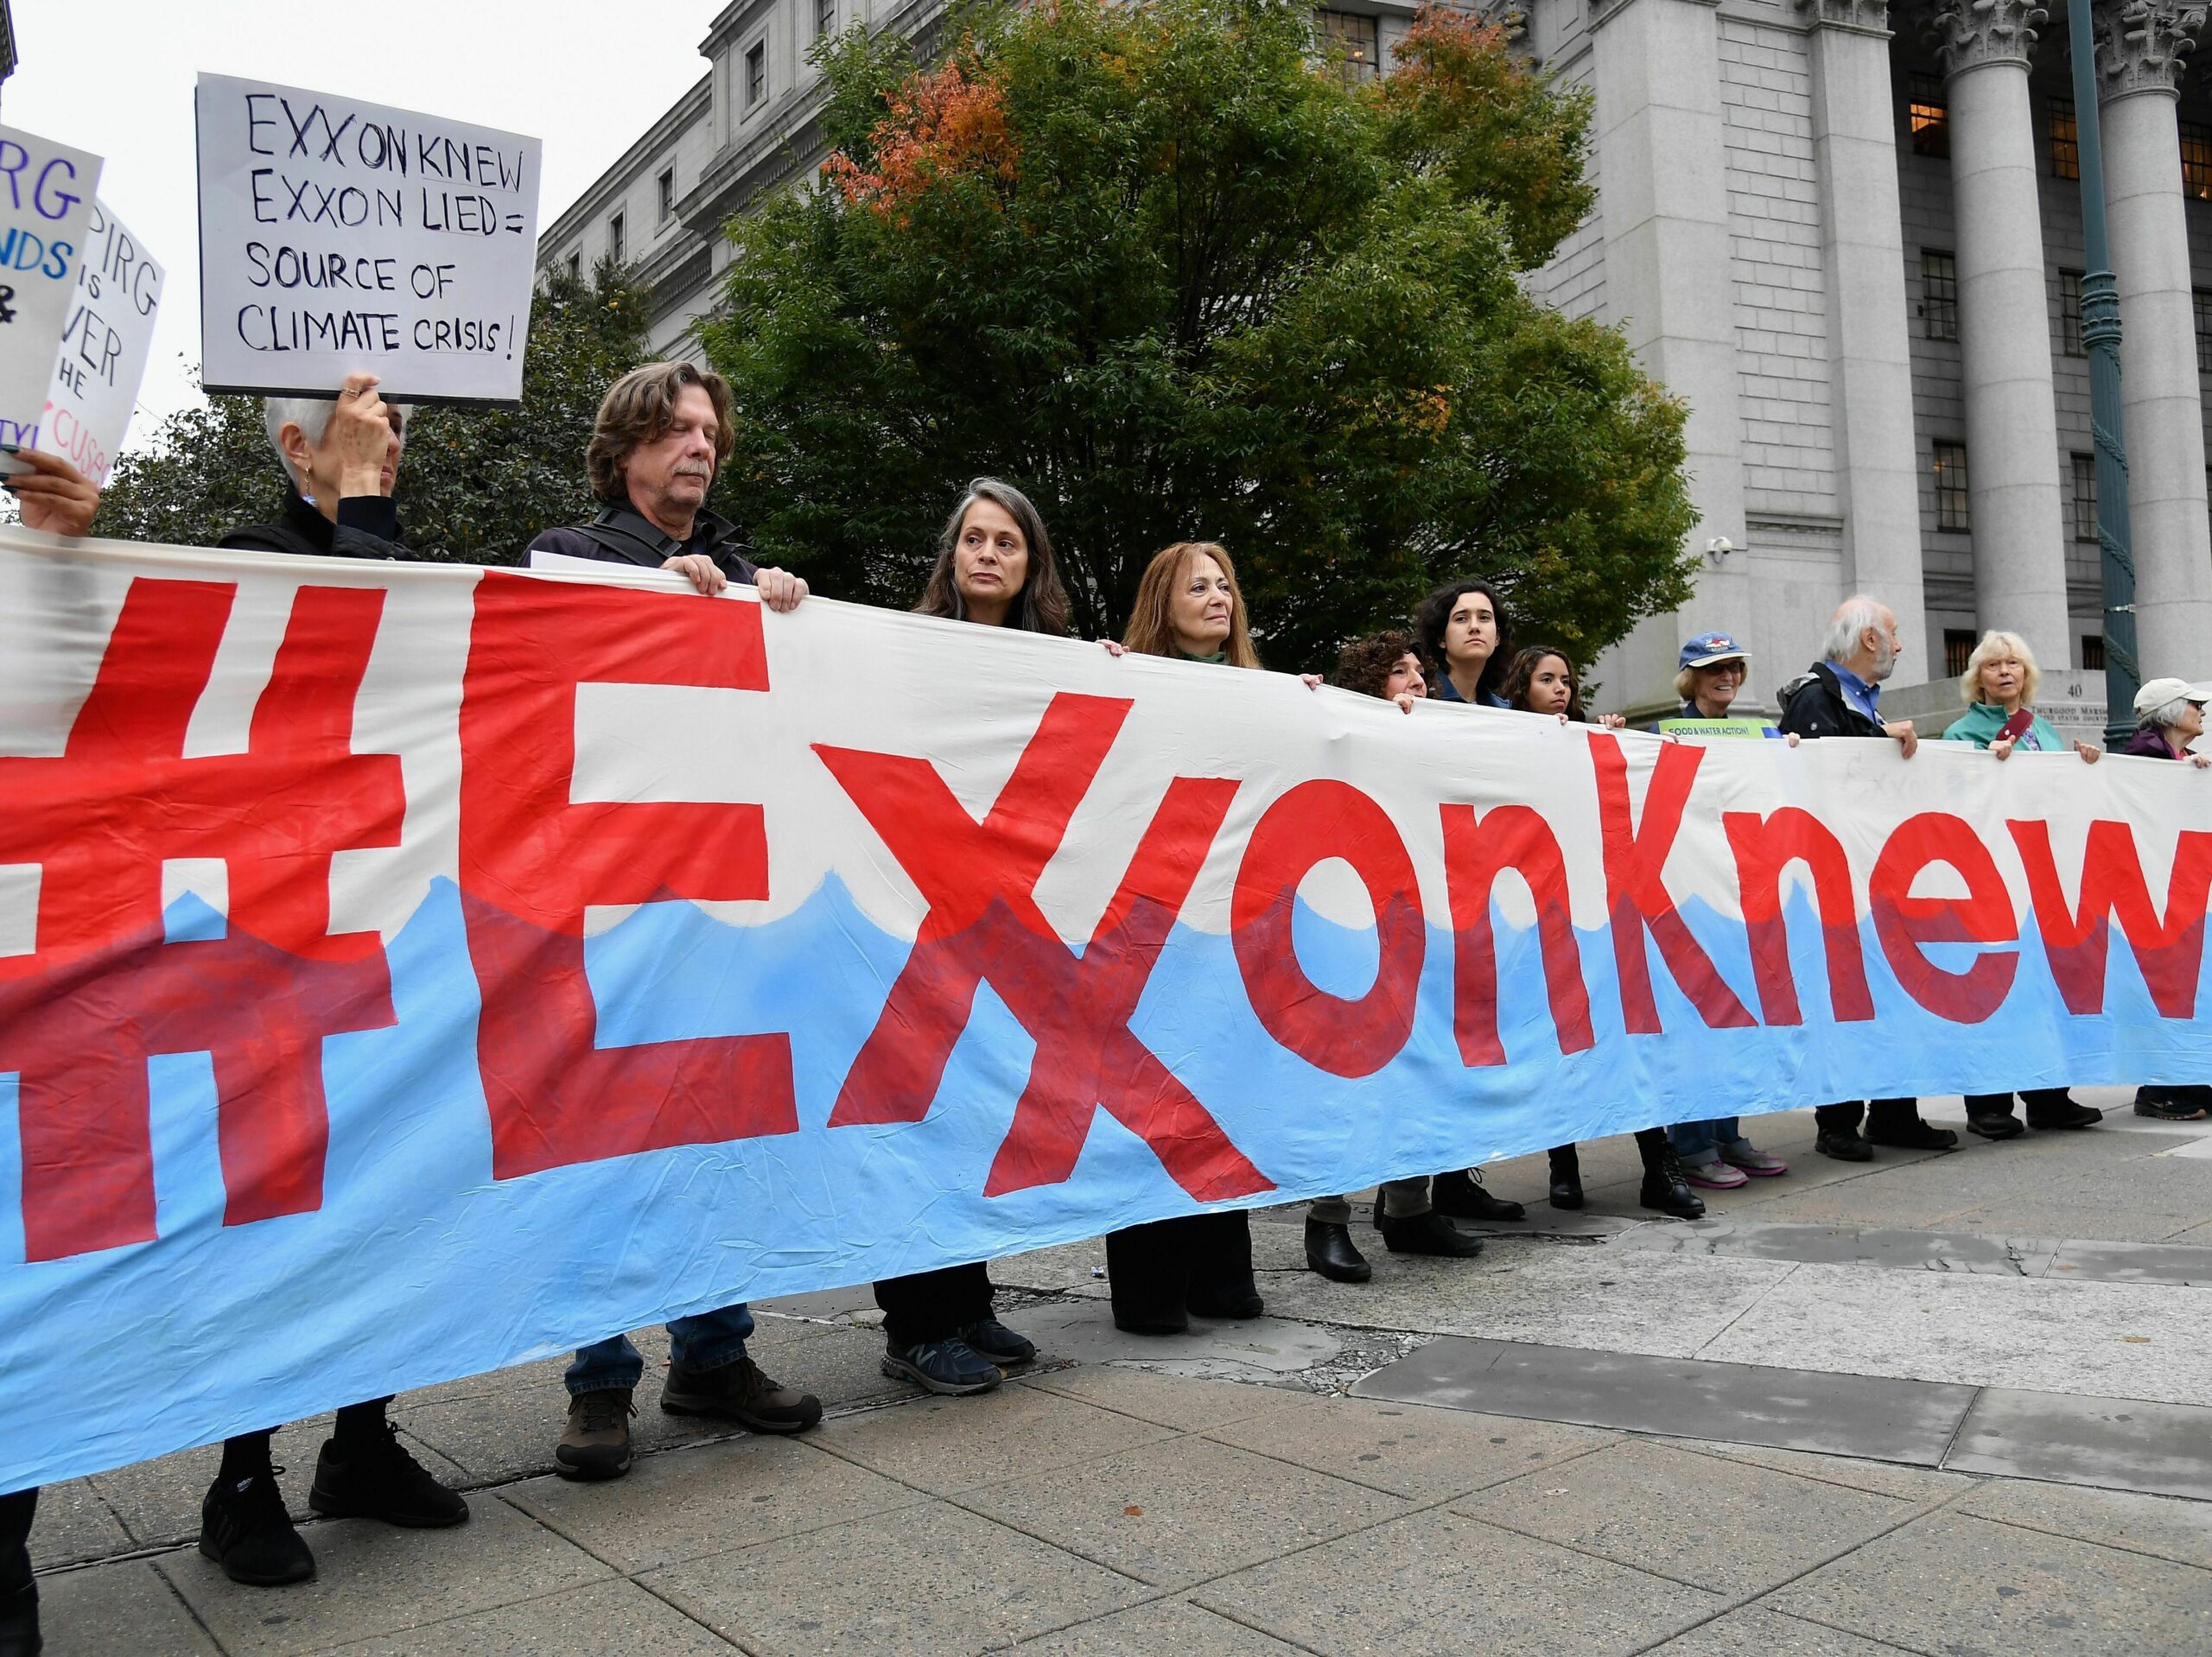 a line of people hold a banner that says #ExxonKnew